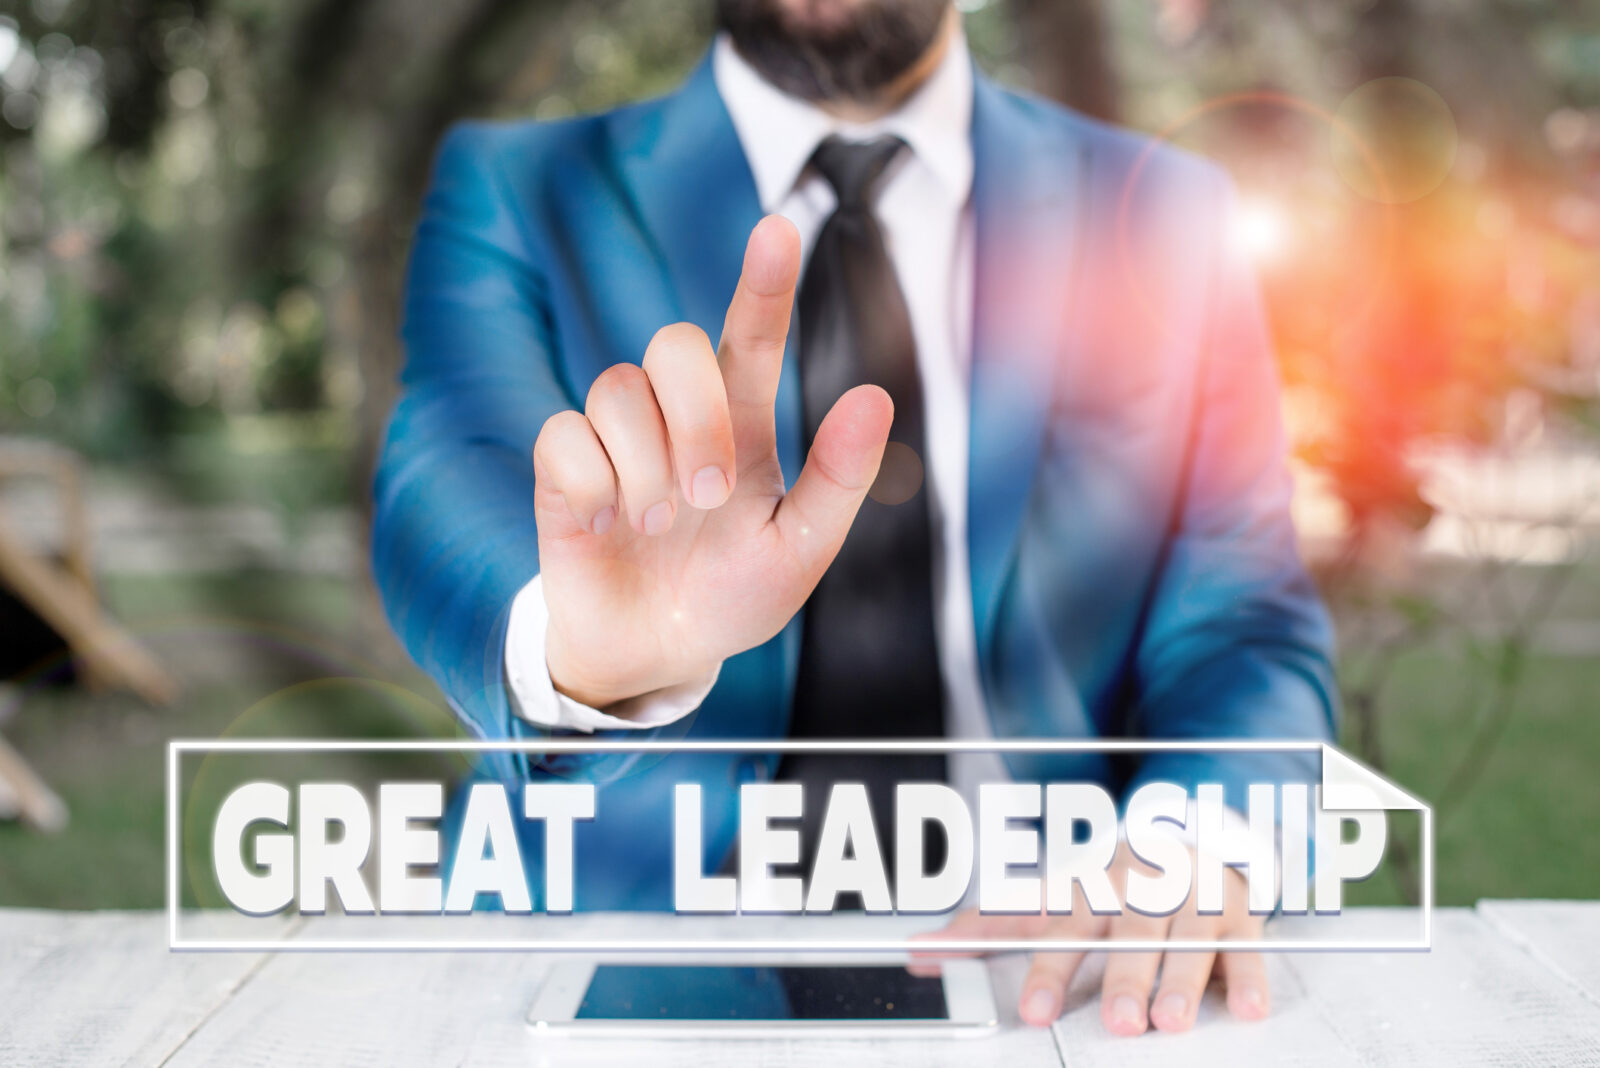 8 Essential Tips for Building Good Leadership Habits